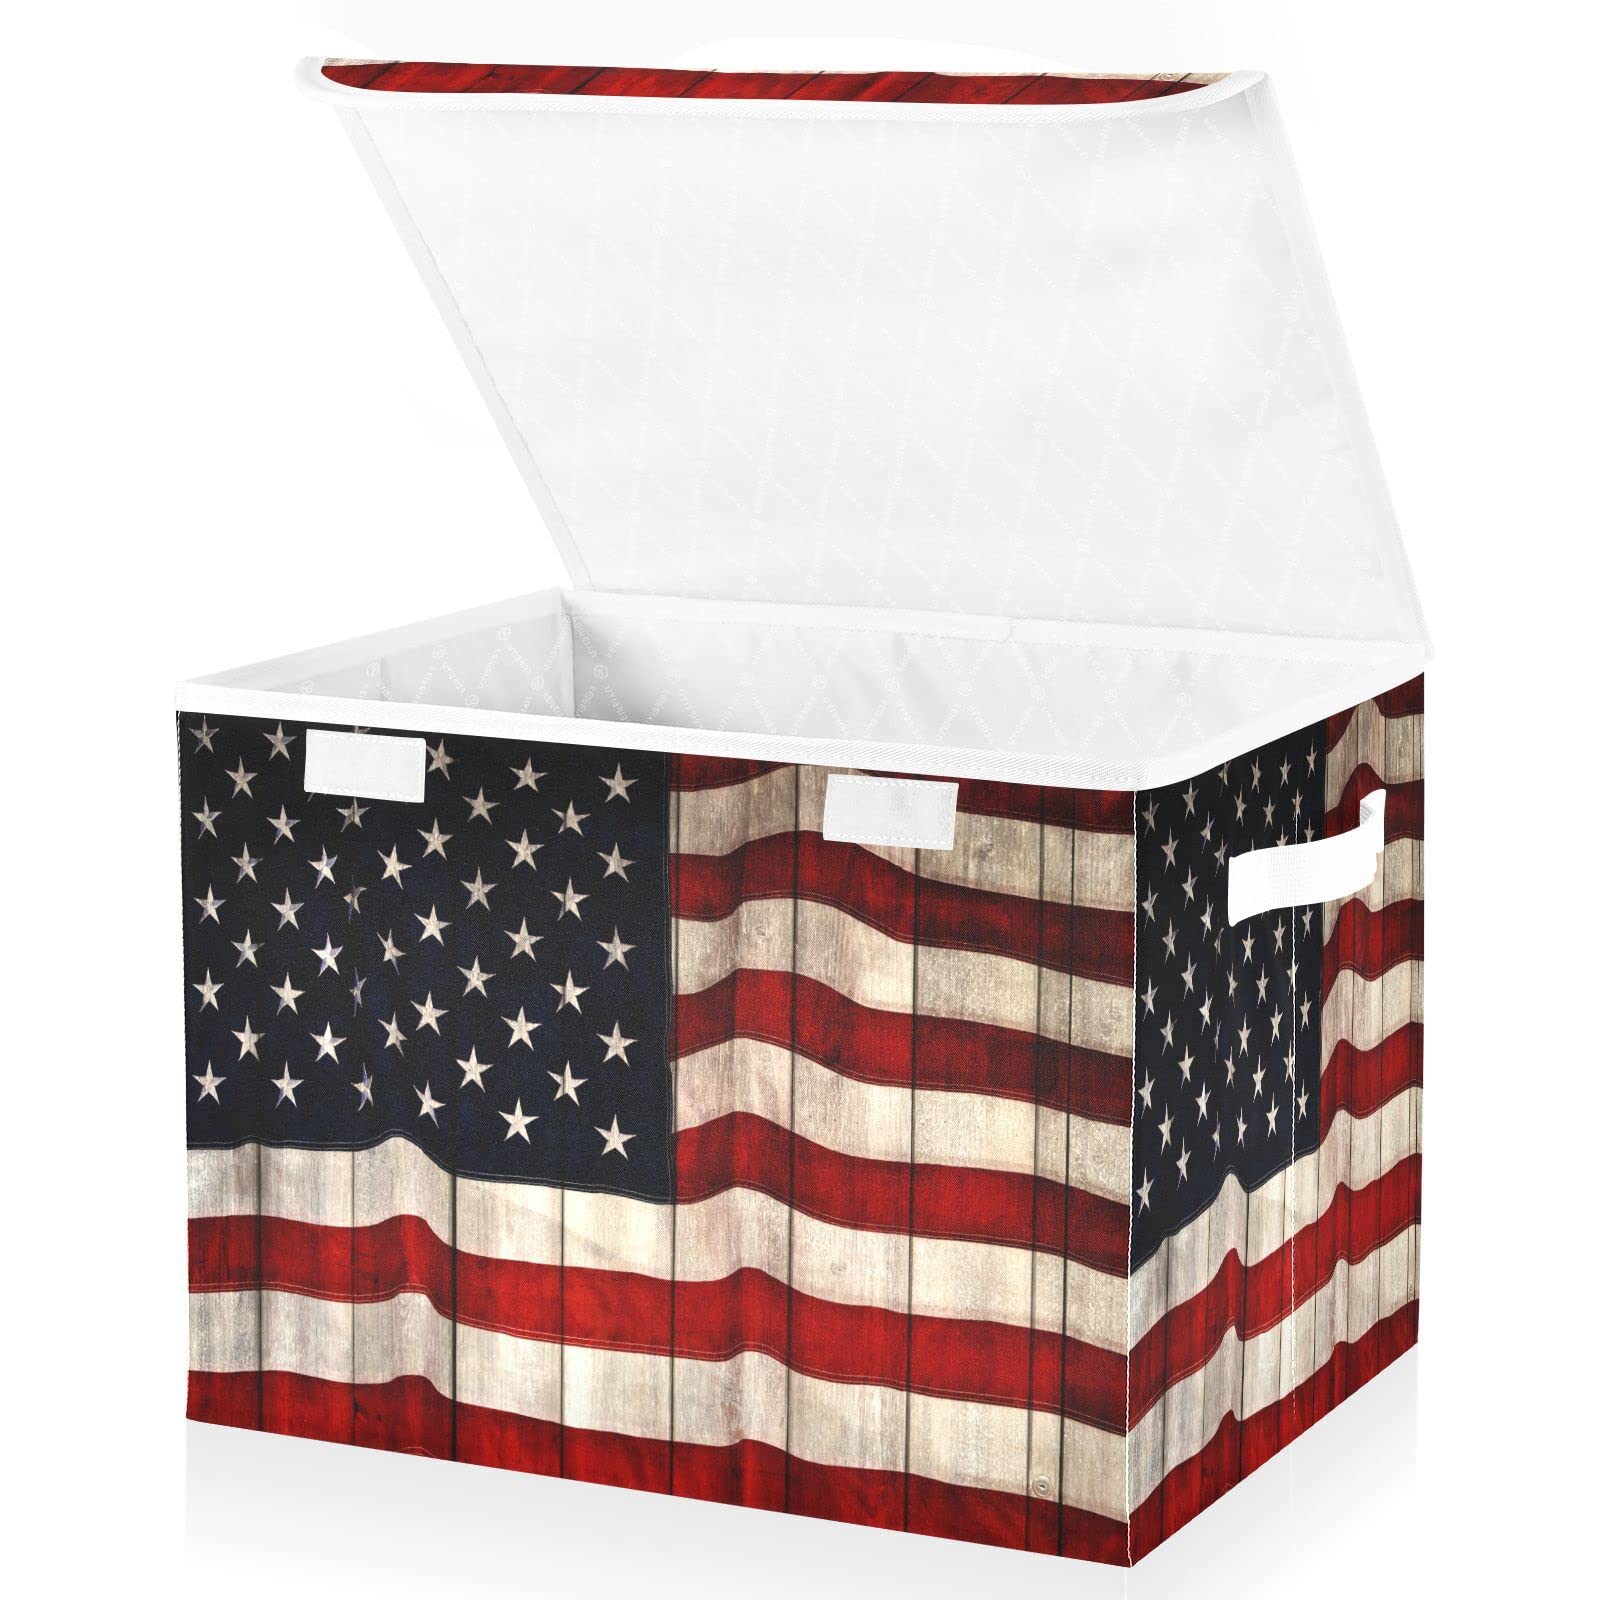 Gredecor Large Storage Basket Bins with Lid American Flag Wooden Pattern Storage Boxes Organizer with Handle 16.5"x12.6"x11.8" Collapsible Storage Cube for Toys Bedroom Nursery Home